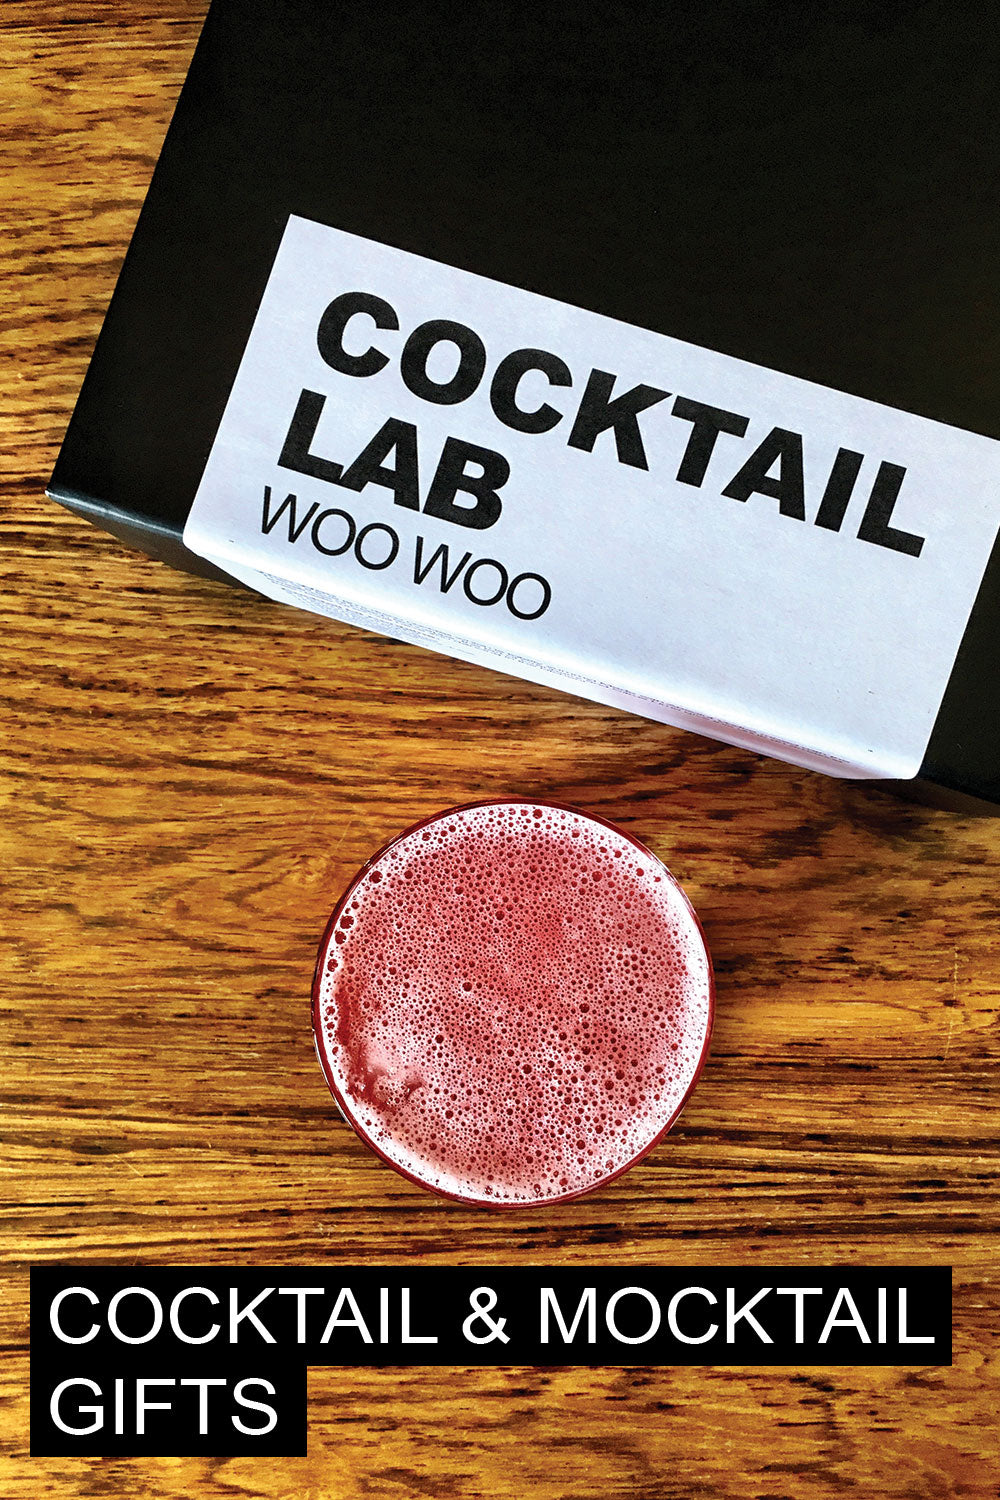 Is the Woo Woo Christmas Cocktail?